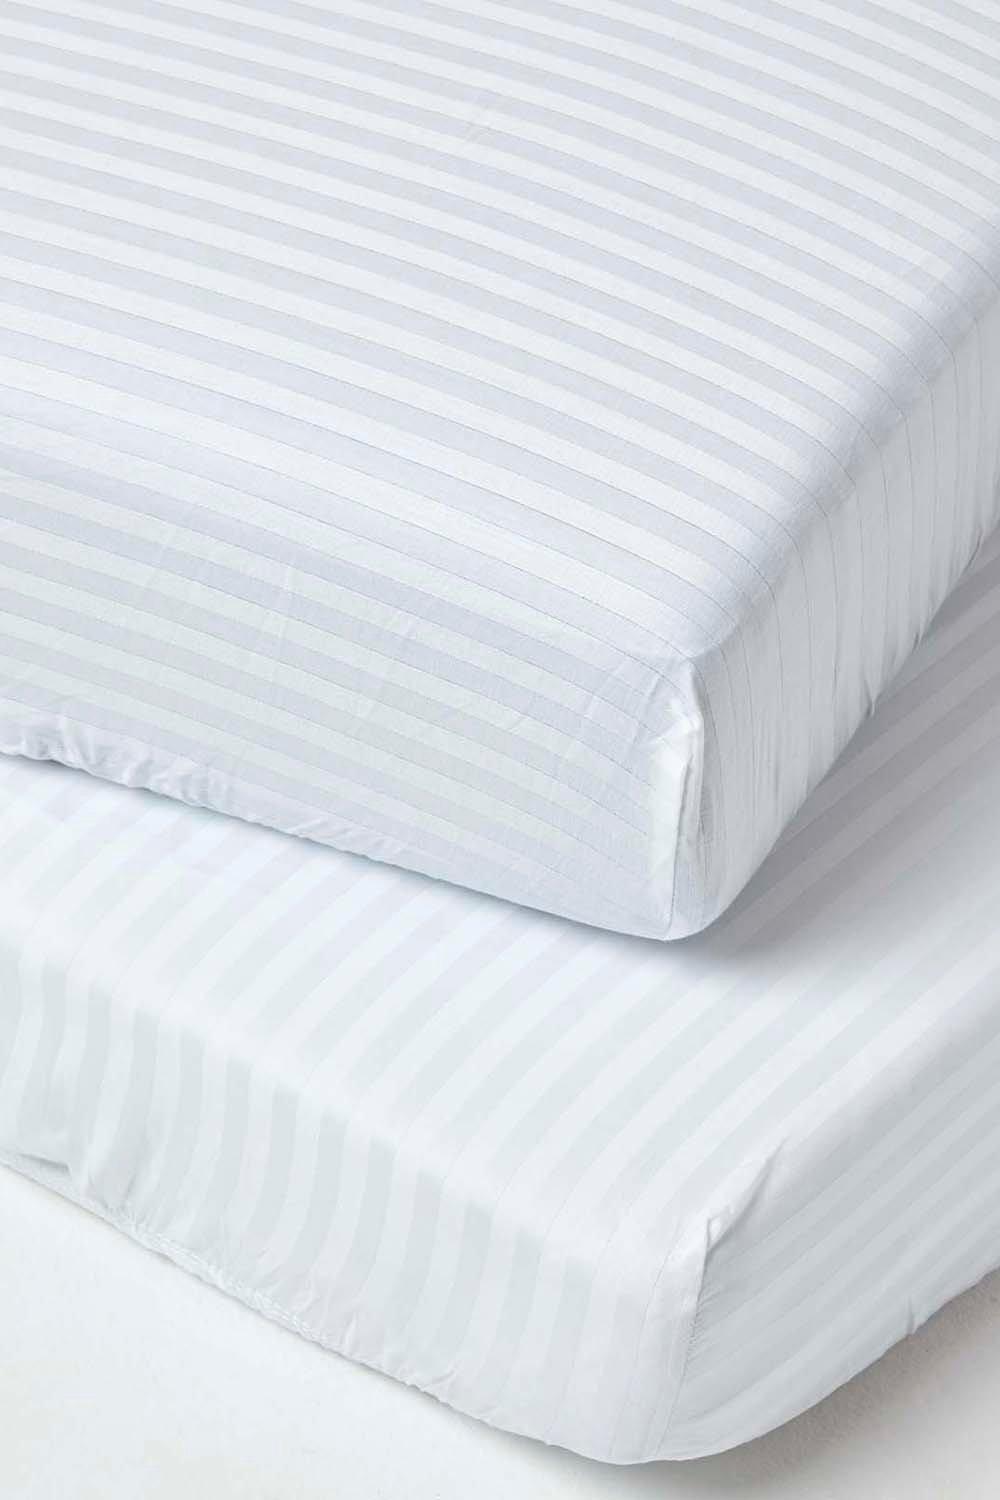 Homescapes Cotton Stripe Fitted Cot Sheets 330 Thread Count, 2 Pack|Size: Cot|white